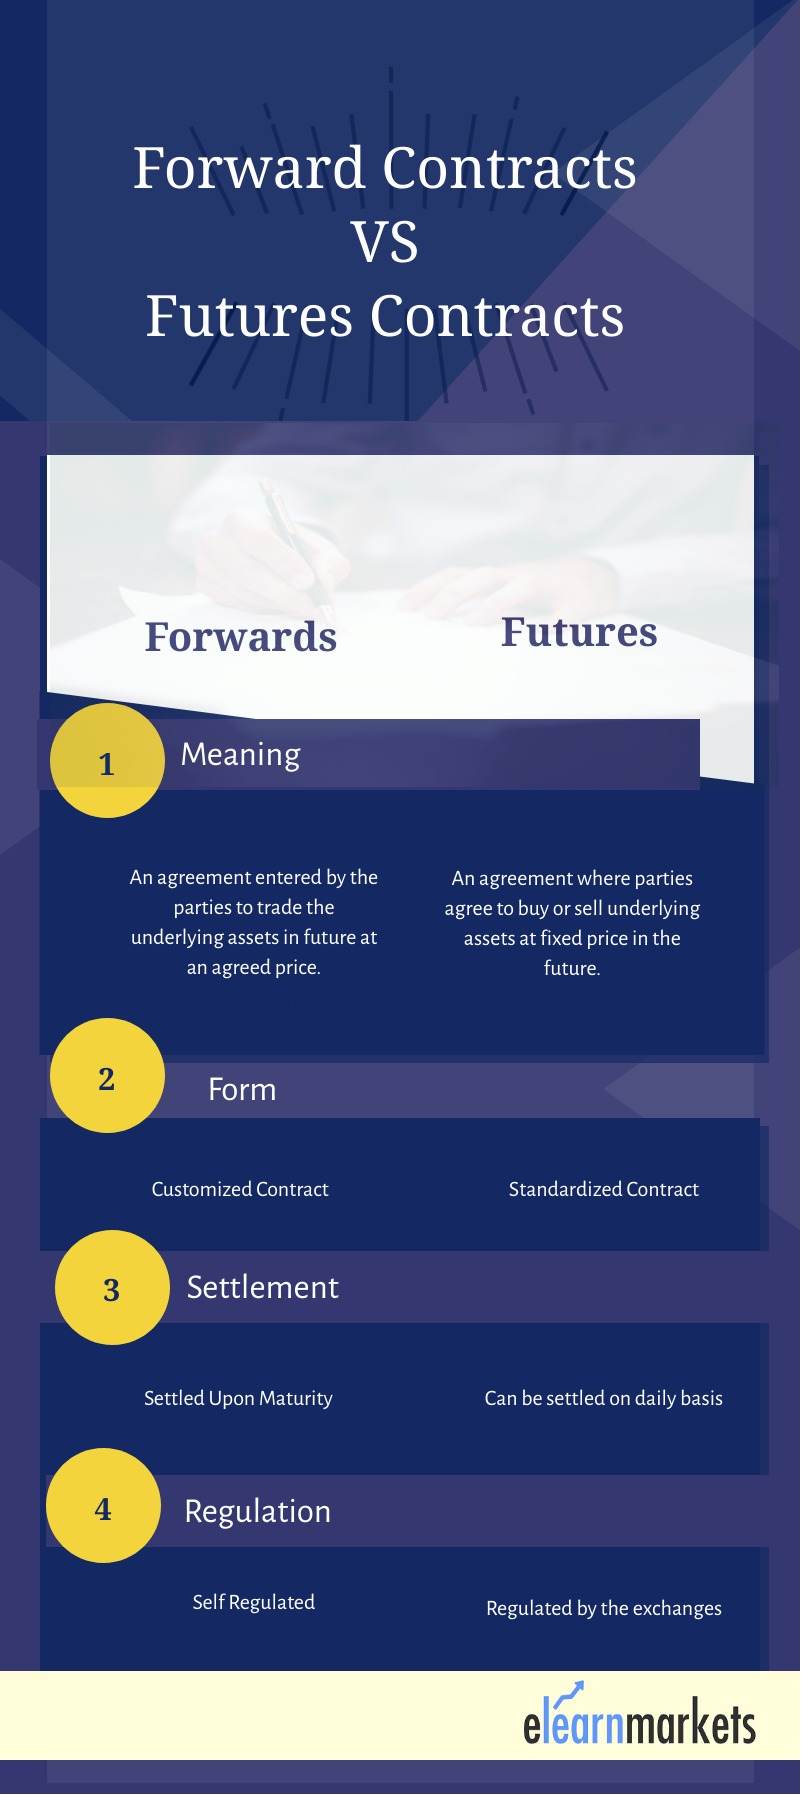 Forward Contract - Definition, Example, Basics, & Risks 2